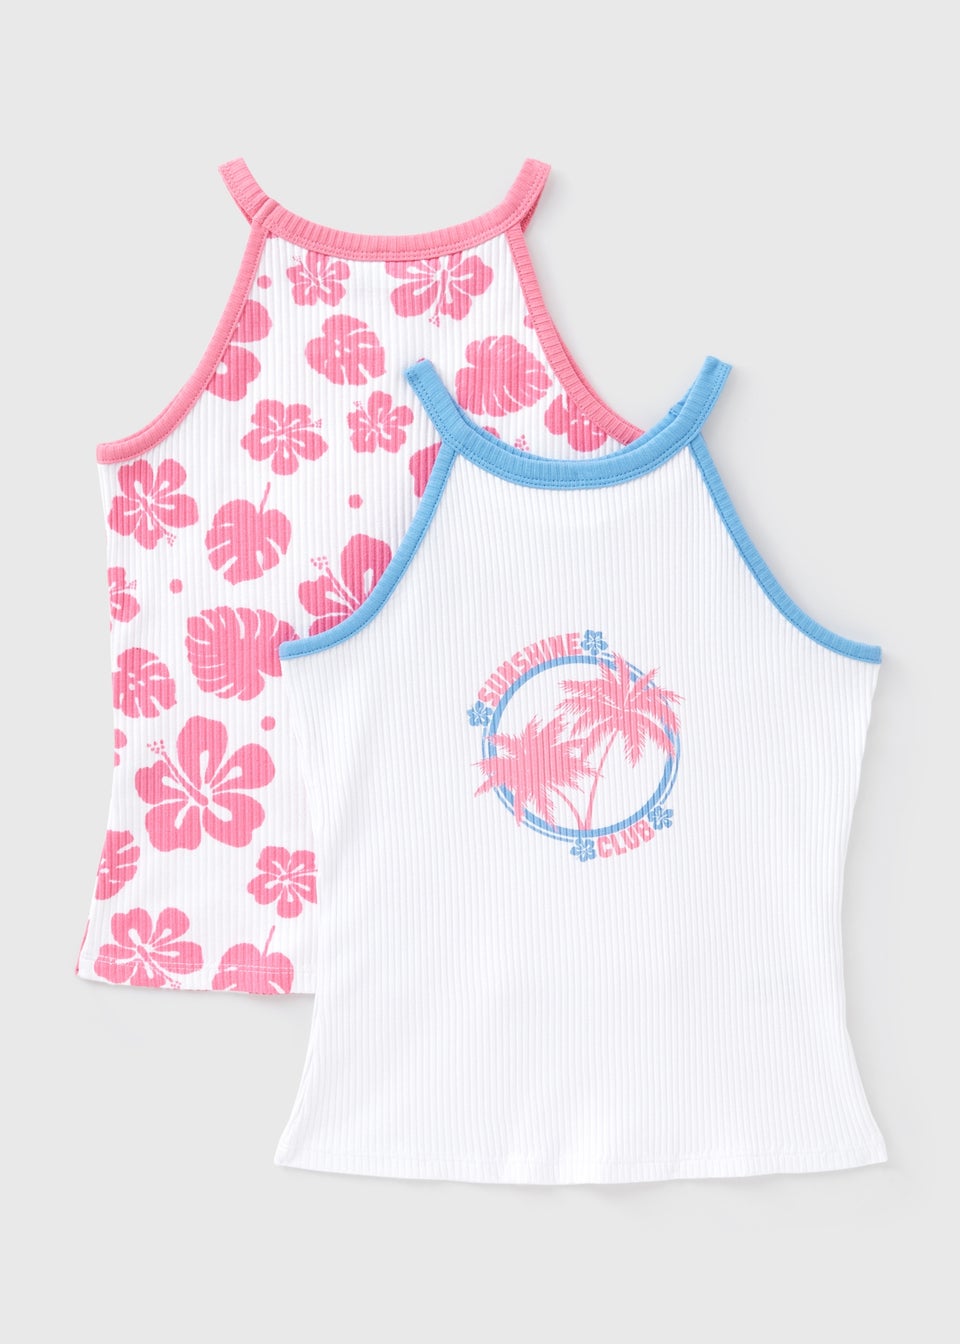 Girls 2 Pack Pink Tops (7-13yrs)